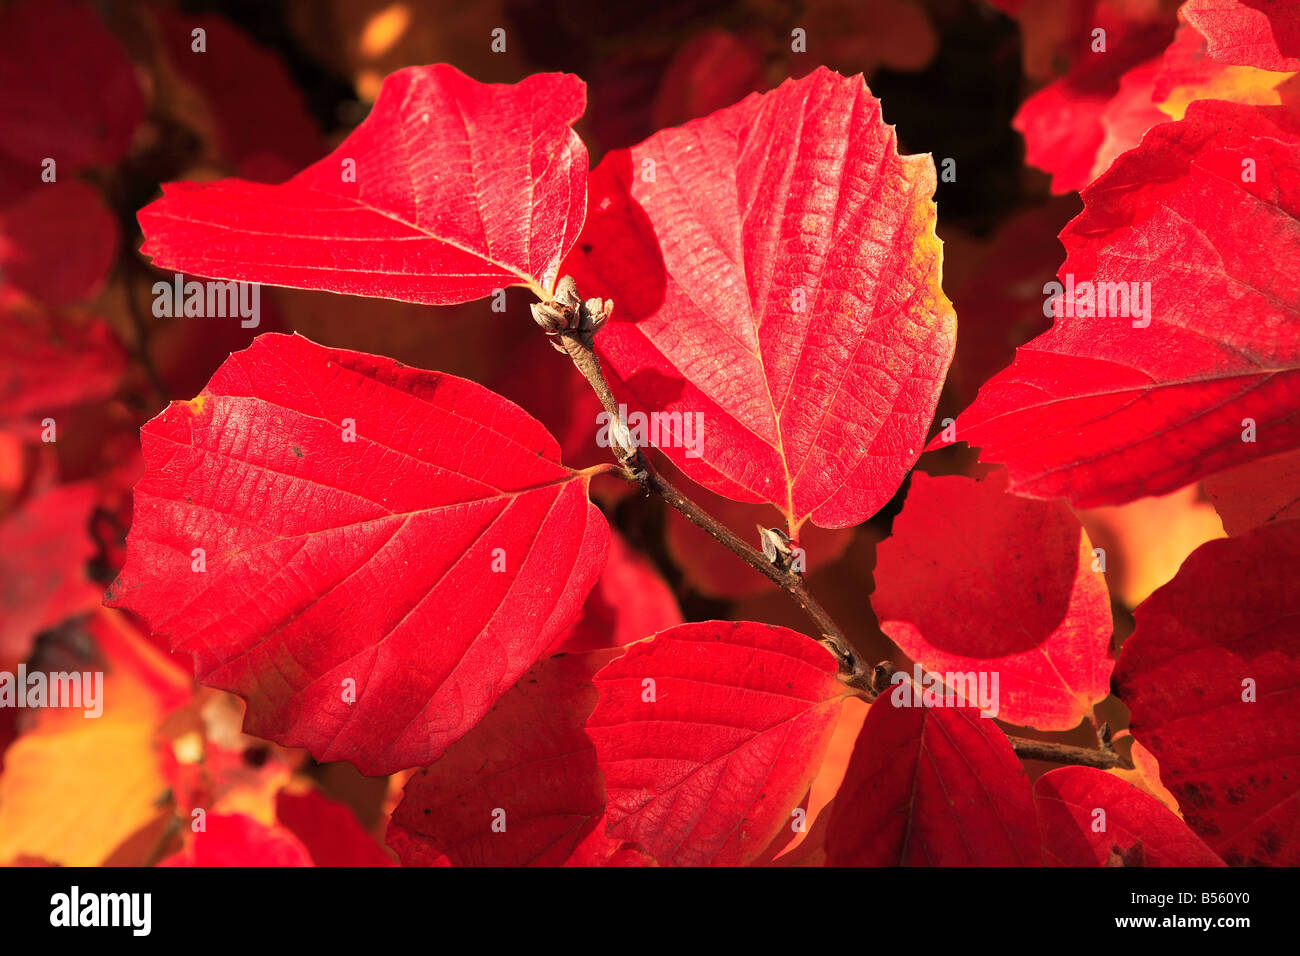 Red leaves of Fothergilla major tree Stock Photo